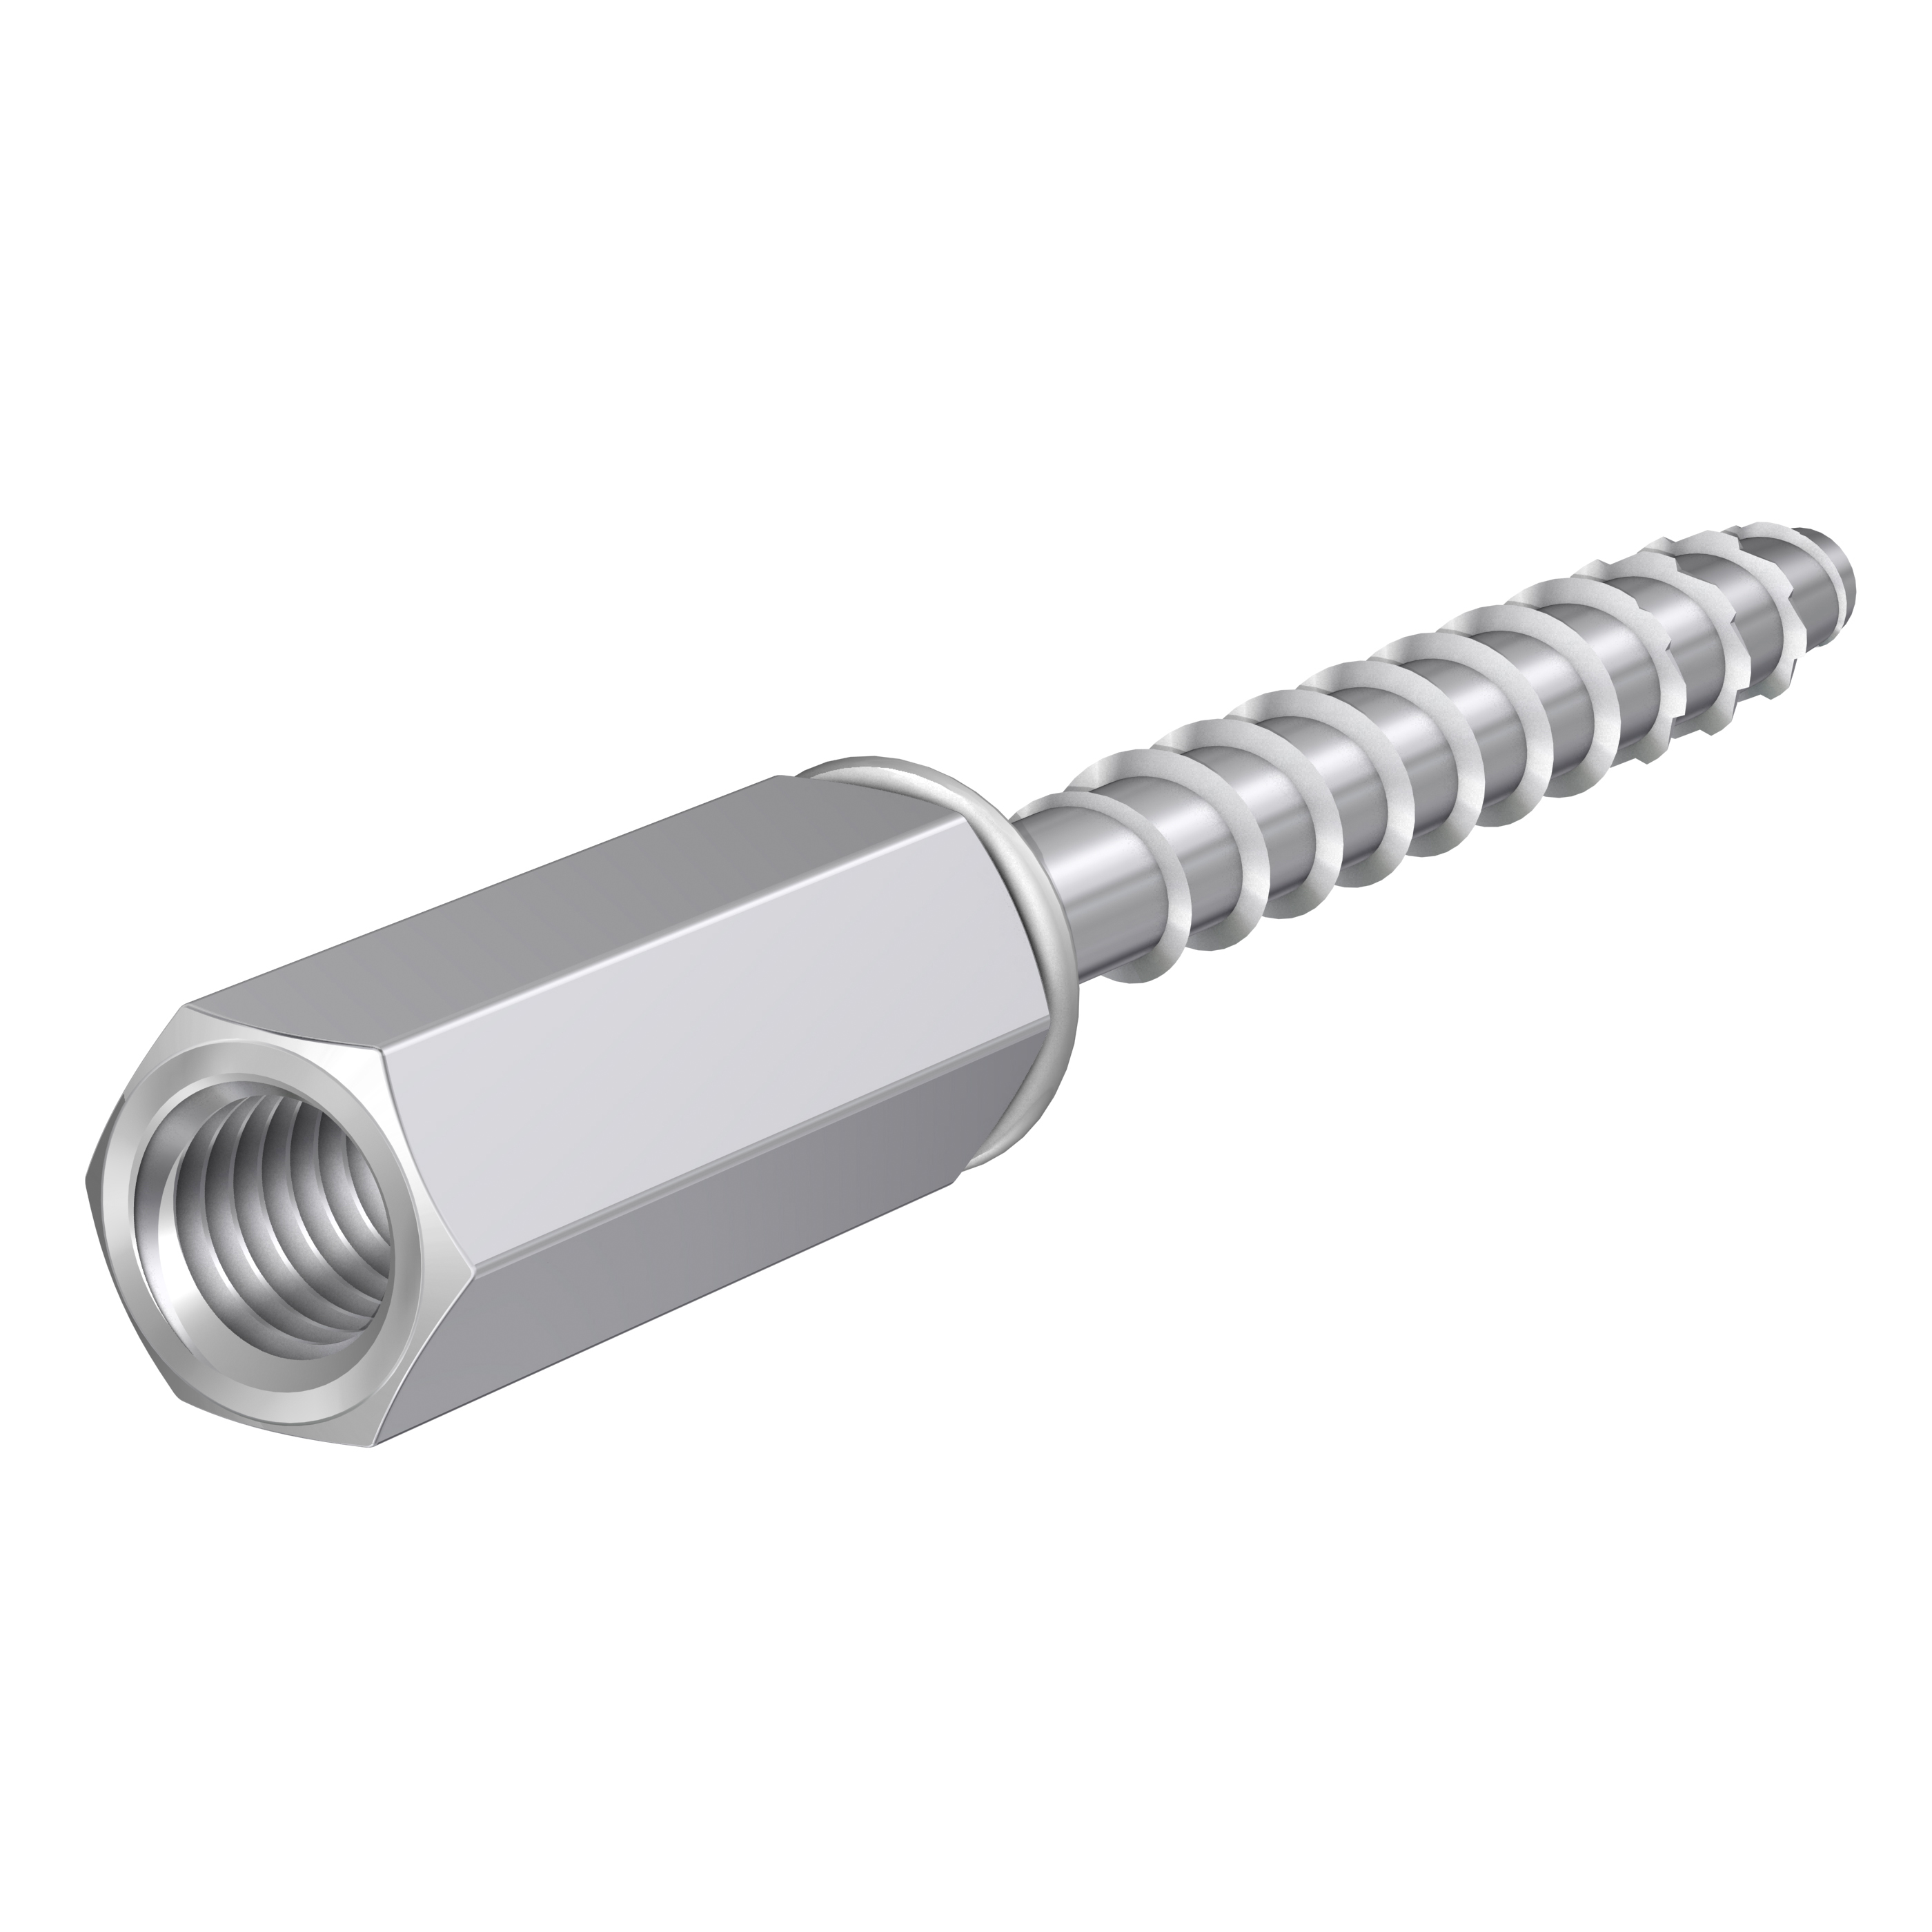 SCS-I Self-tapping Concrete Screw